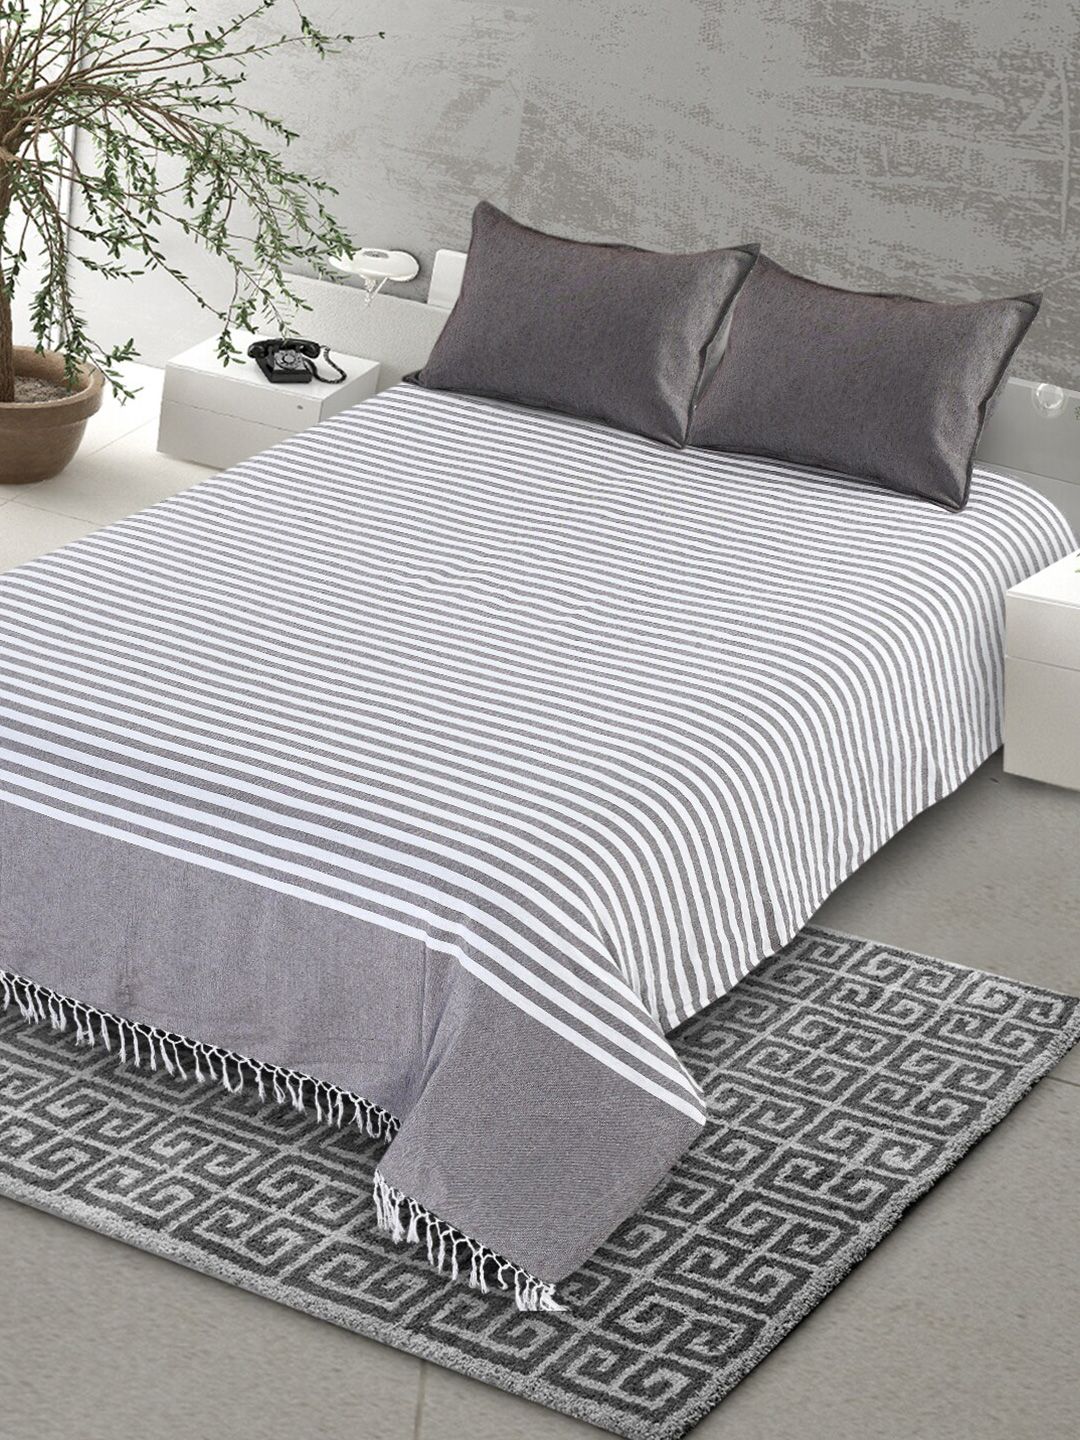 Saral Home Grey & White Striped 160 TC King Bedsheet with 2 Pillow Covers Price in India